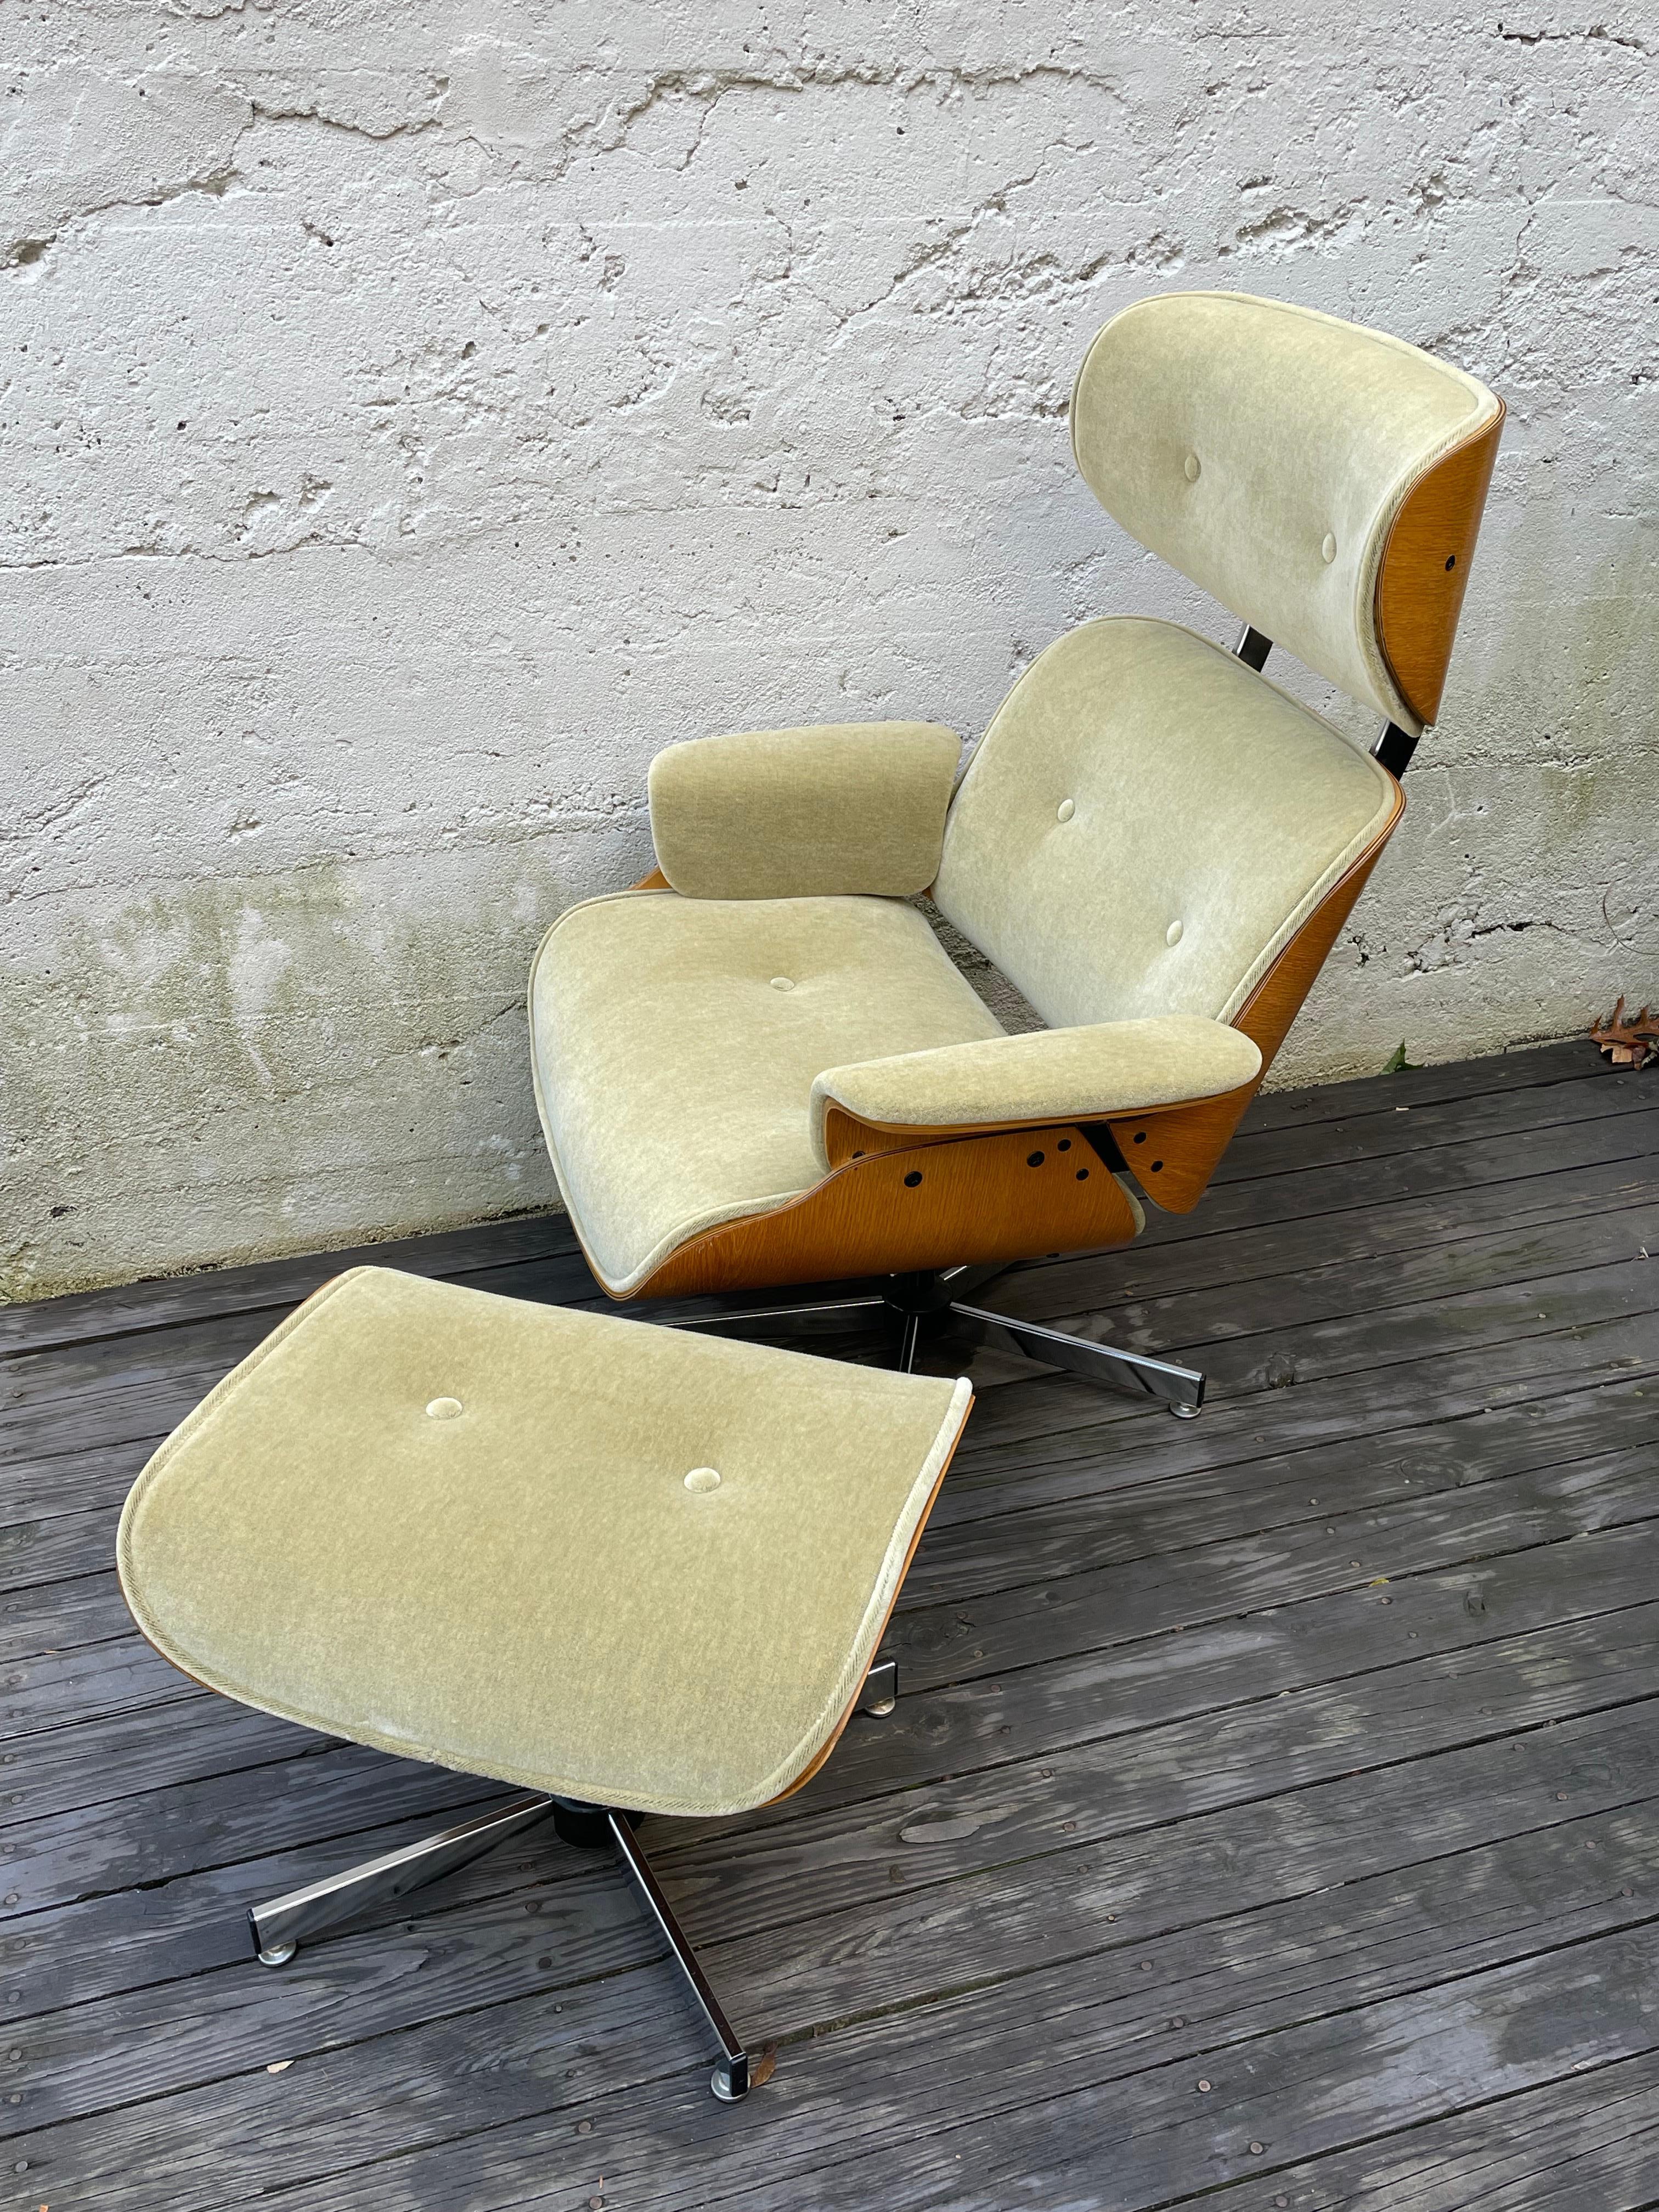 Stunning lounge chair and ottoman by Plycraft upholstered in beautiful Champagne color mohair. Molded birchwood frame on chrome base.